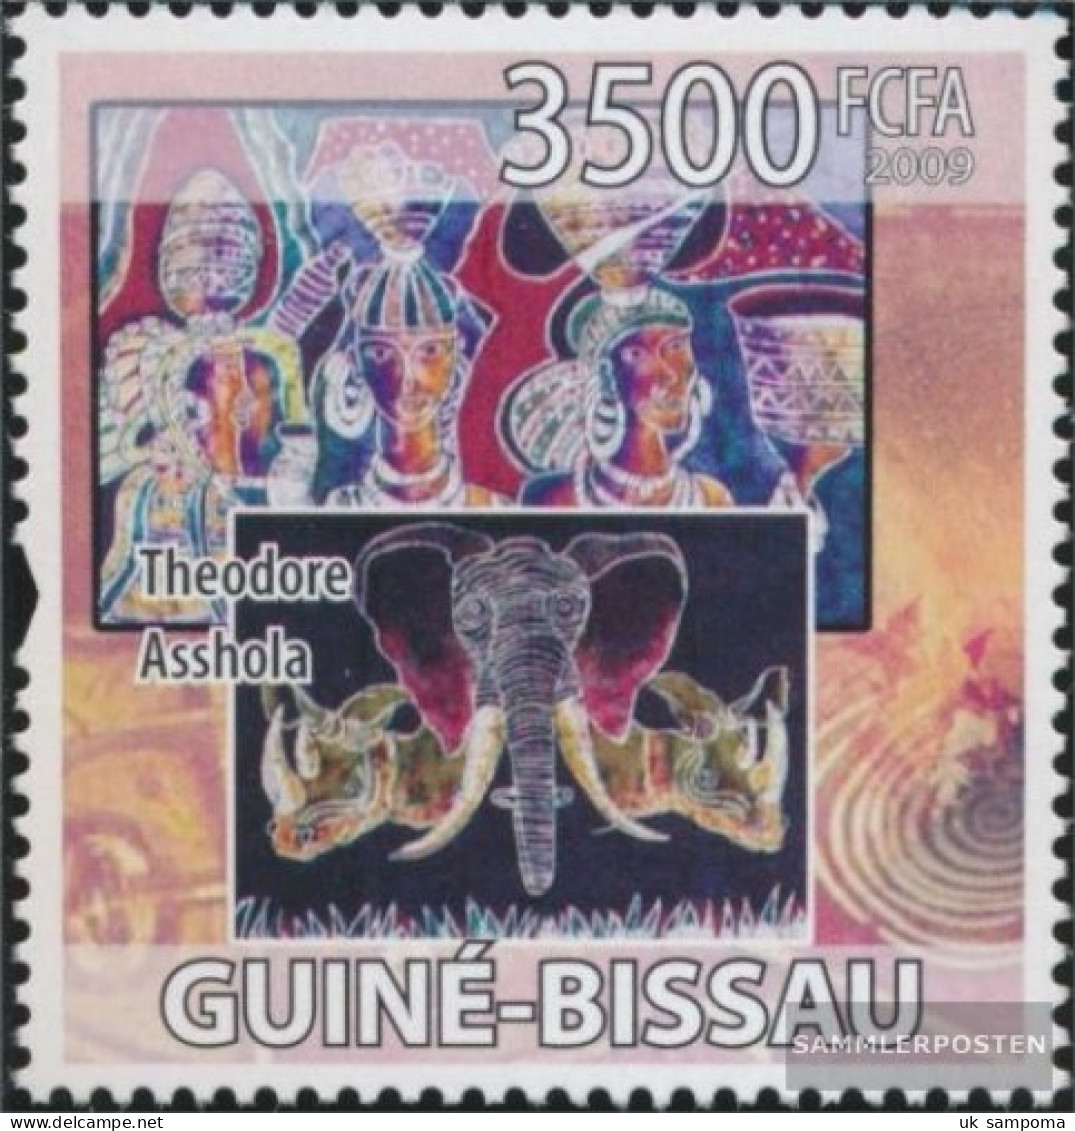 Guinea-Bissau 4264 (complete. Issue) Unmounted Mint / Never Hinged 2009 African Artist - Guinea-Bissau